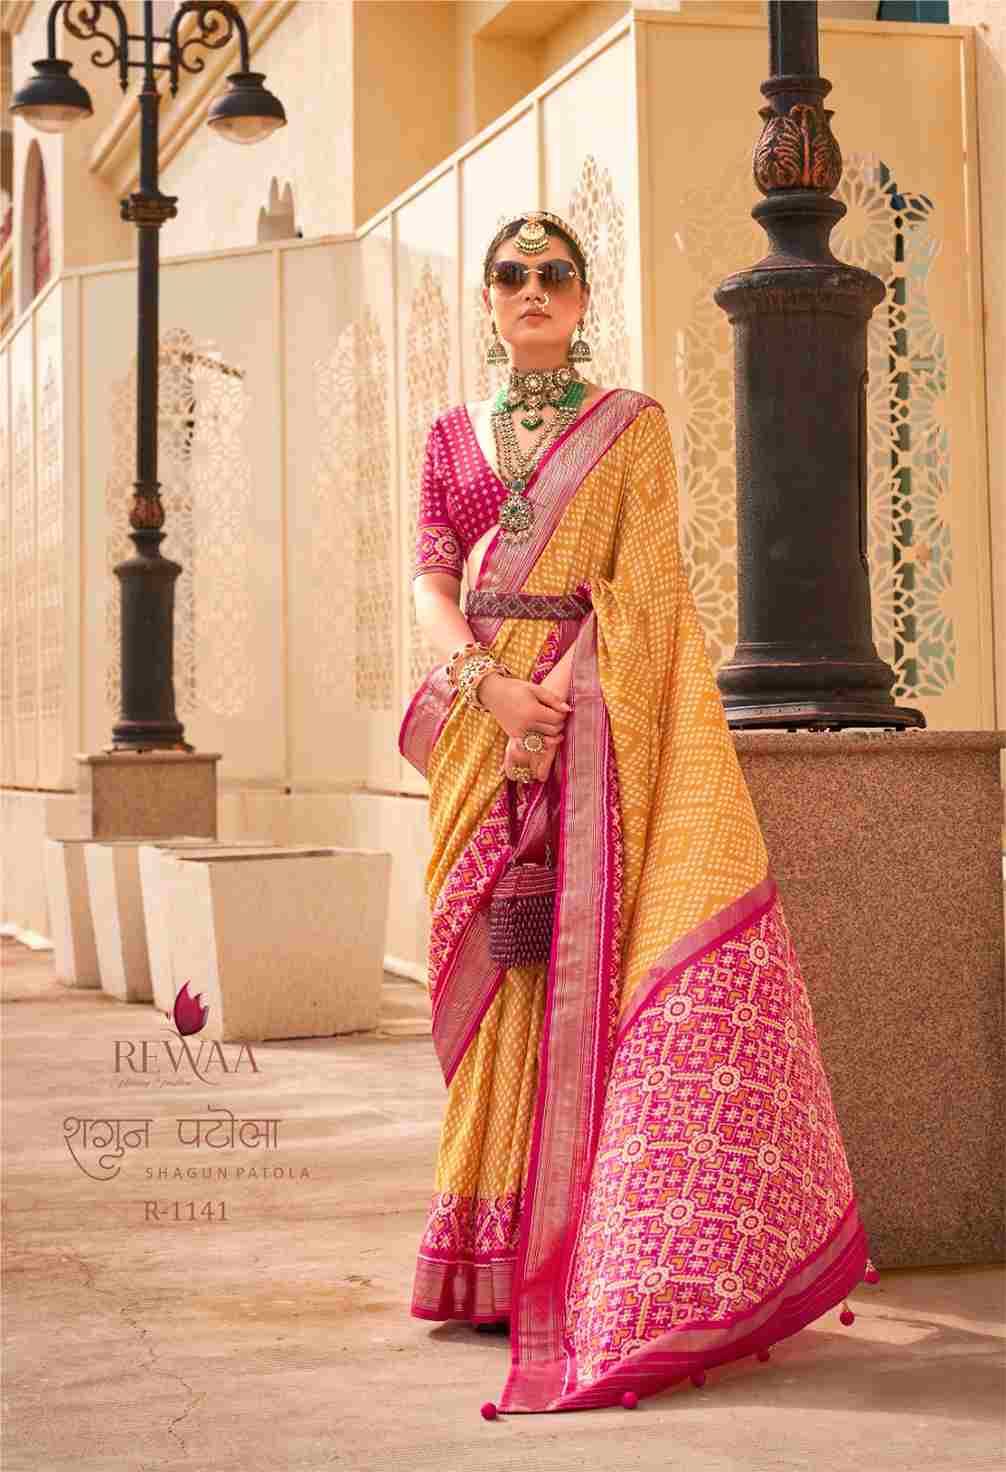 Shagun Patola By Rewaa 1132 To 1143 Series Indian Traditional Wear Collection Beautiful Stylish Fancy Colorful Party Wear & Occasional Wear Patola Silk Sarees At Wholesale Price